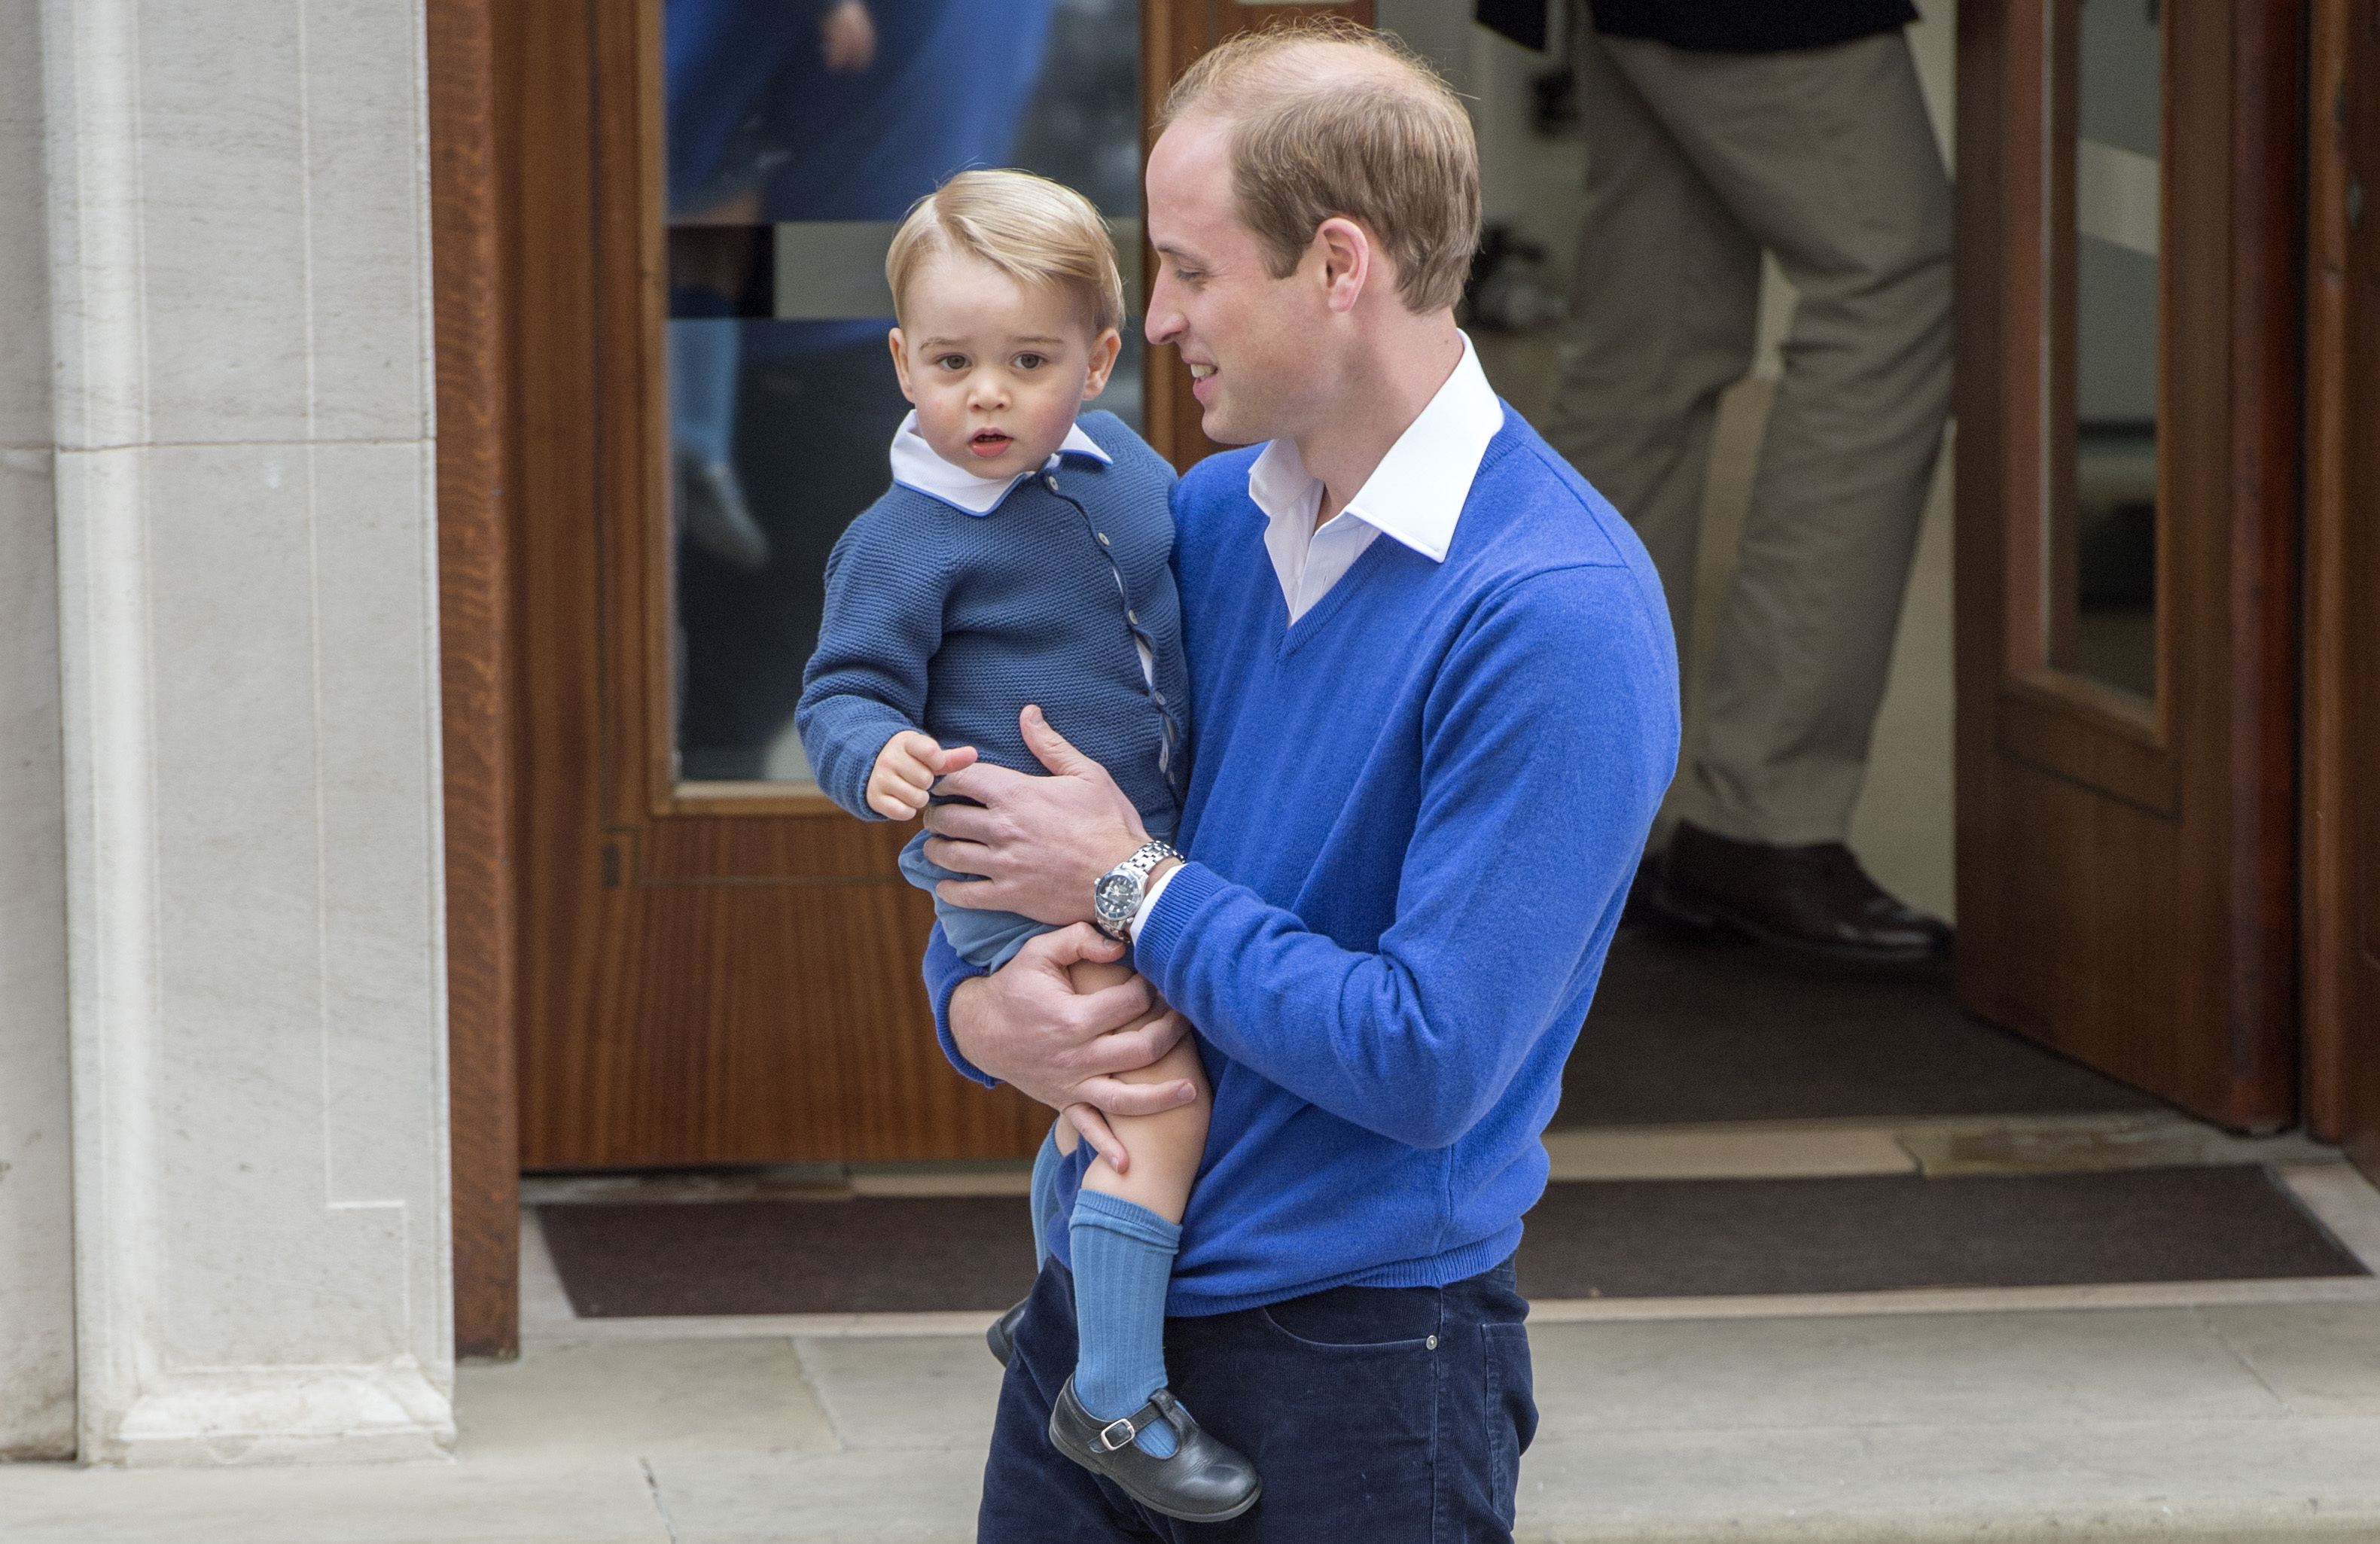 The Duke of Cambridge with his son Prince George as he arrives at the Lindo Wing of St Mary's Hospital in London, after the birth of his newborn daughter